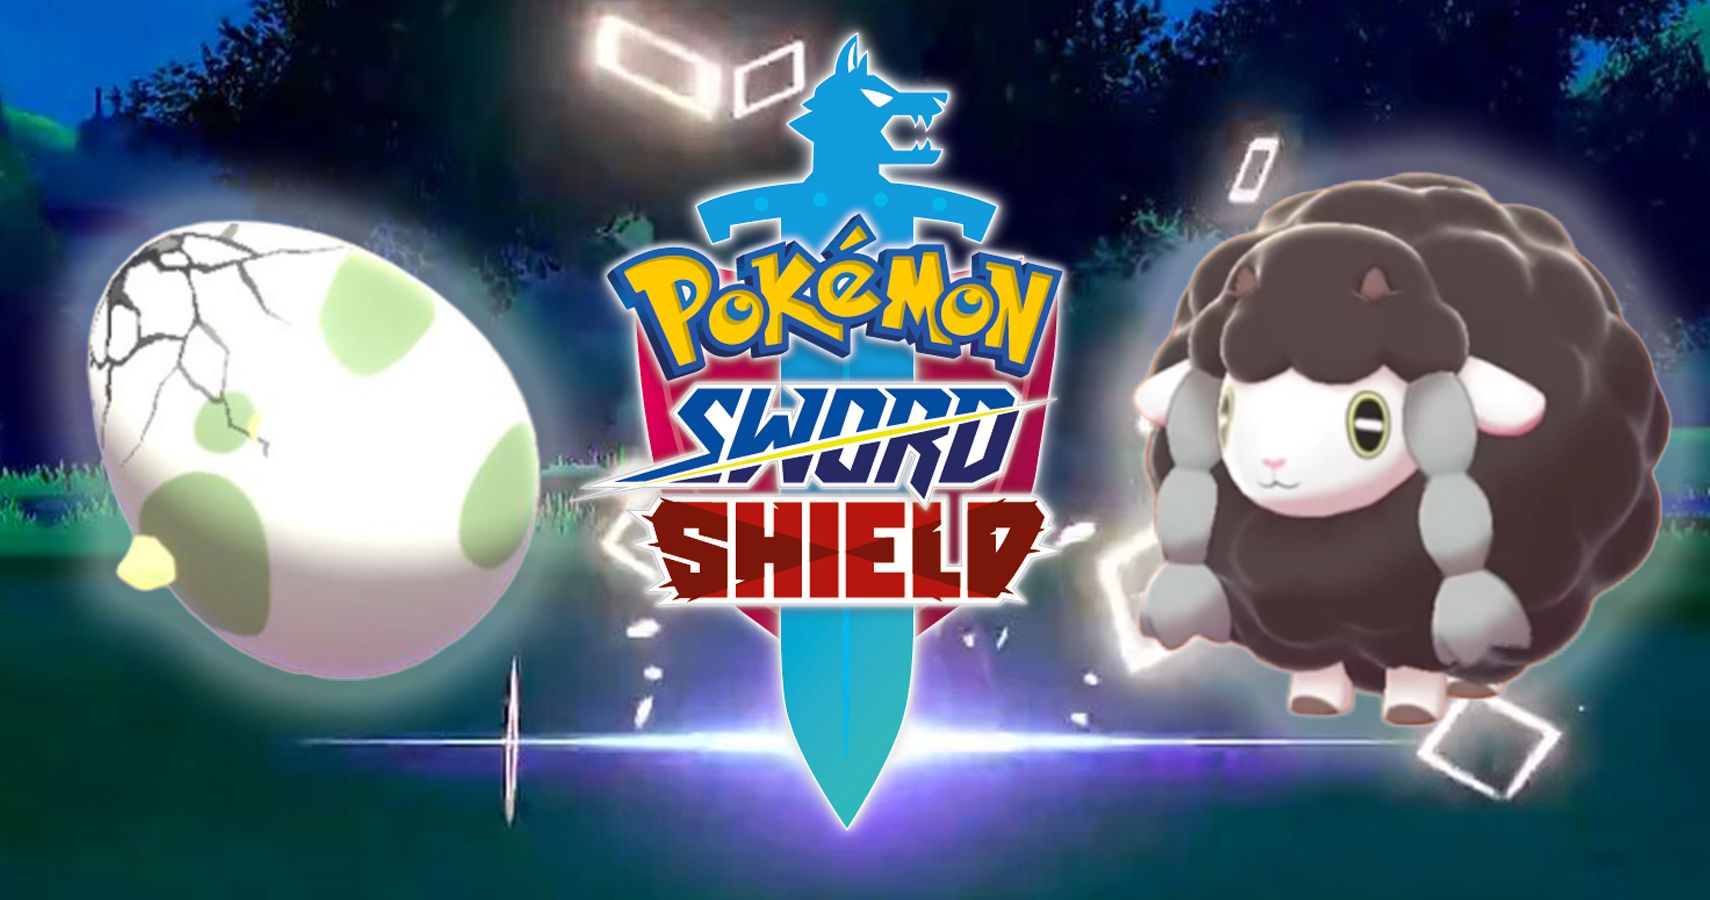 Pokemon Sword and Shield: How to Catch and Breed Shiny Pokemon